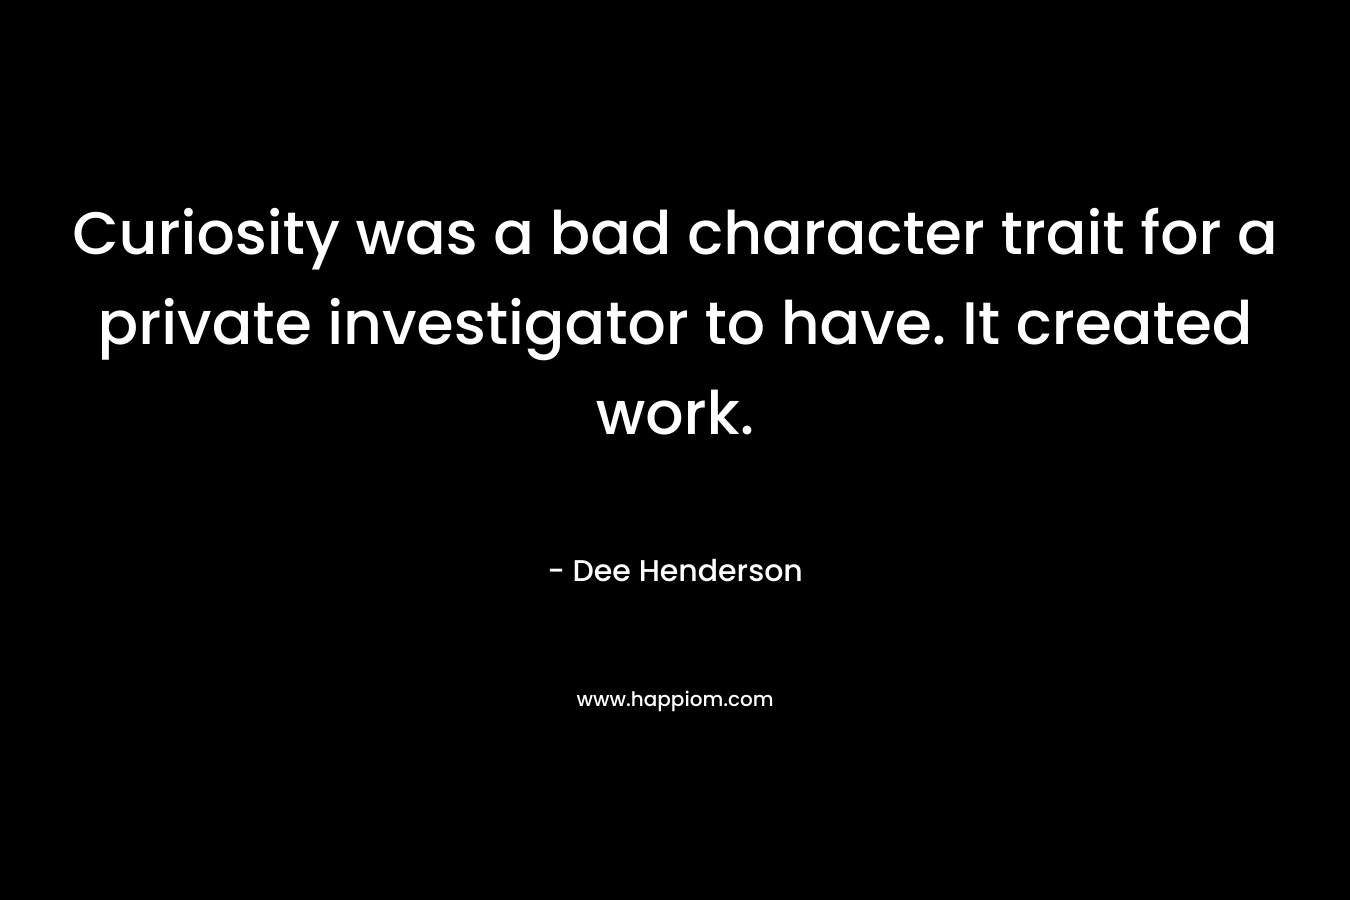 Curiosity was a bad character trait for a private investigator to have. It created work. – Dee Henderson